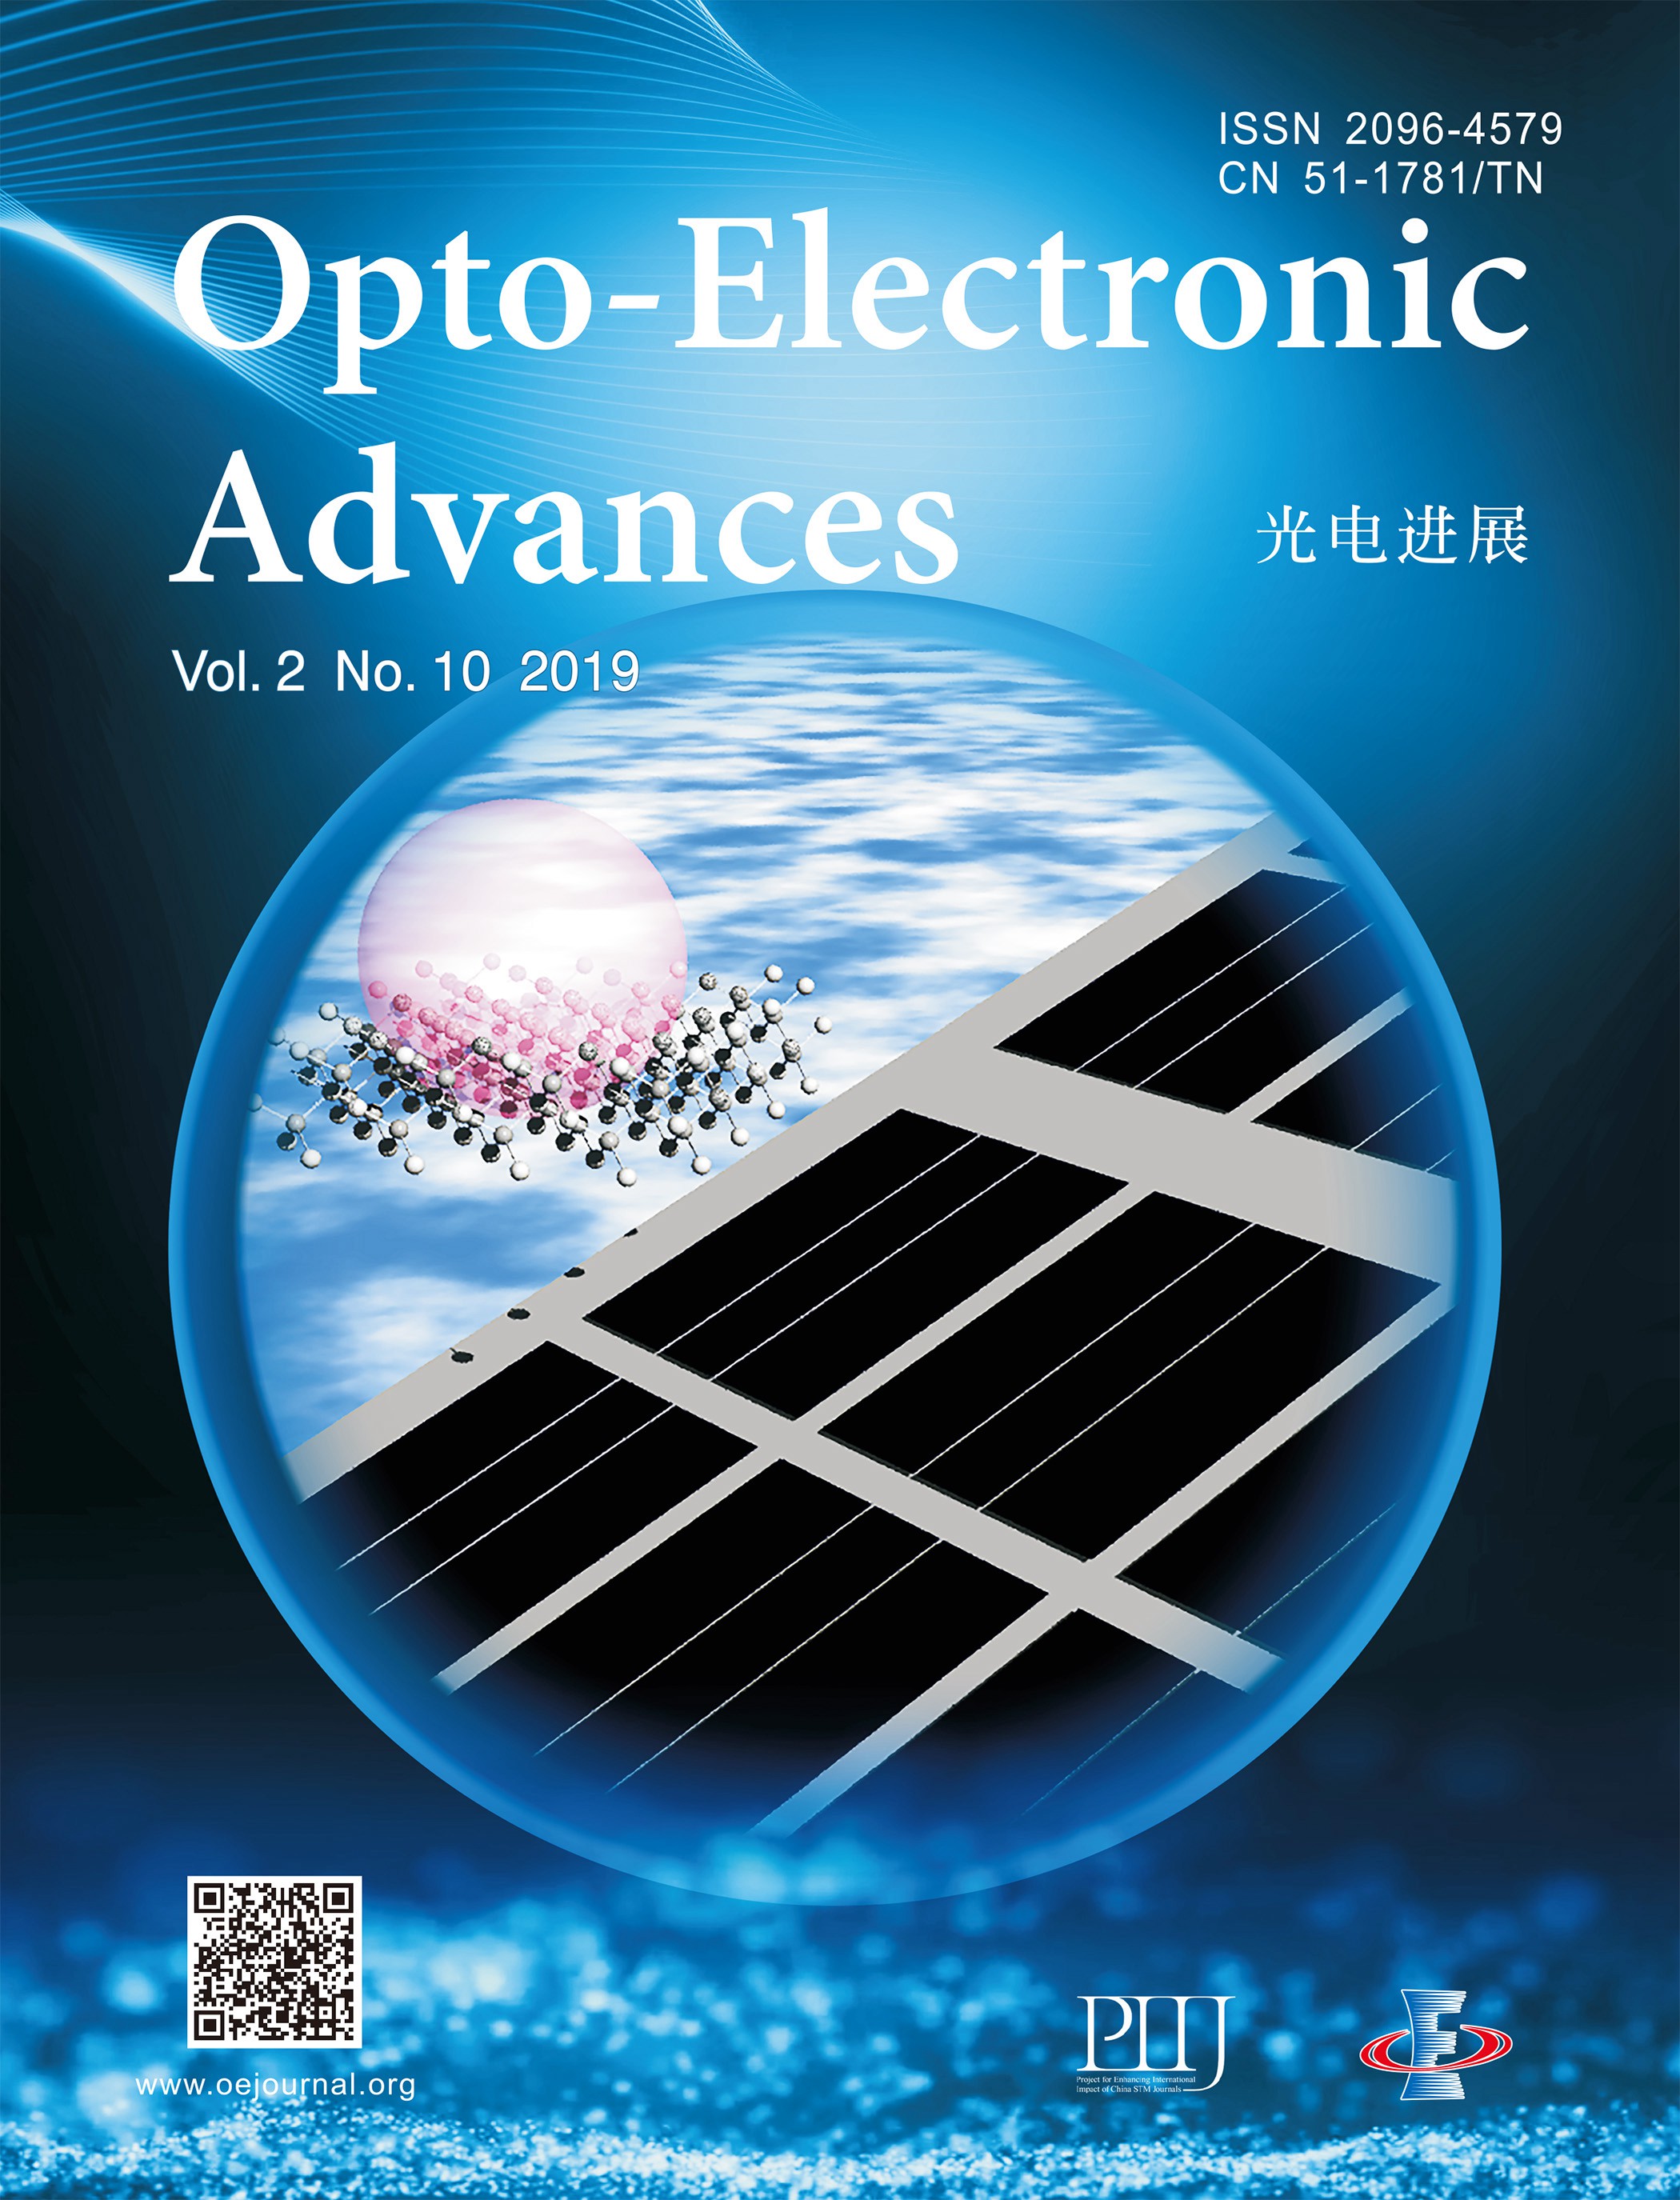 Recent improvement of silicon absorption in opto-electric devices